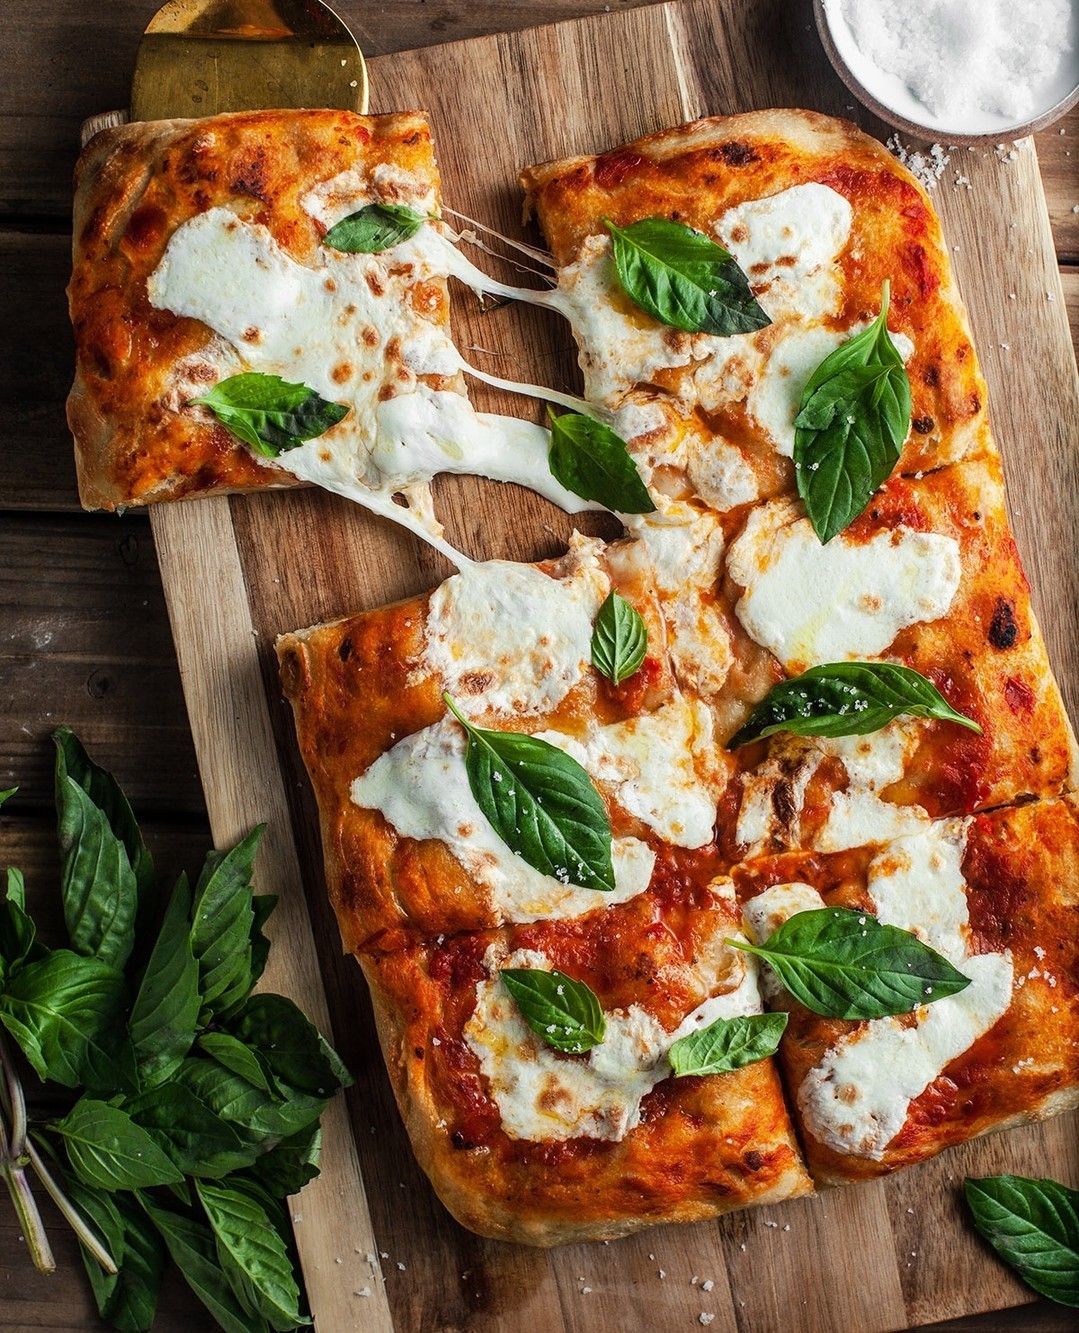 Learn how to make the classic grandma pizza with this recipe🍕 A Grandma is a pan pizza. It's not as fluffy as a Sicilian, nor as thin as a Neapolitan. Grandma pies are easy to prep and perfect for just about any topping, making them perfect for pizza parties!